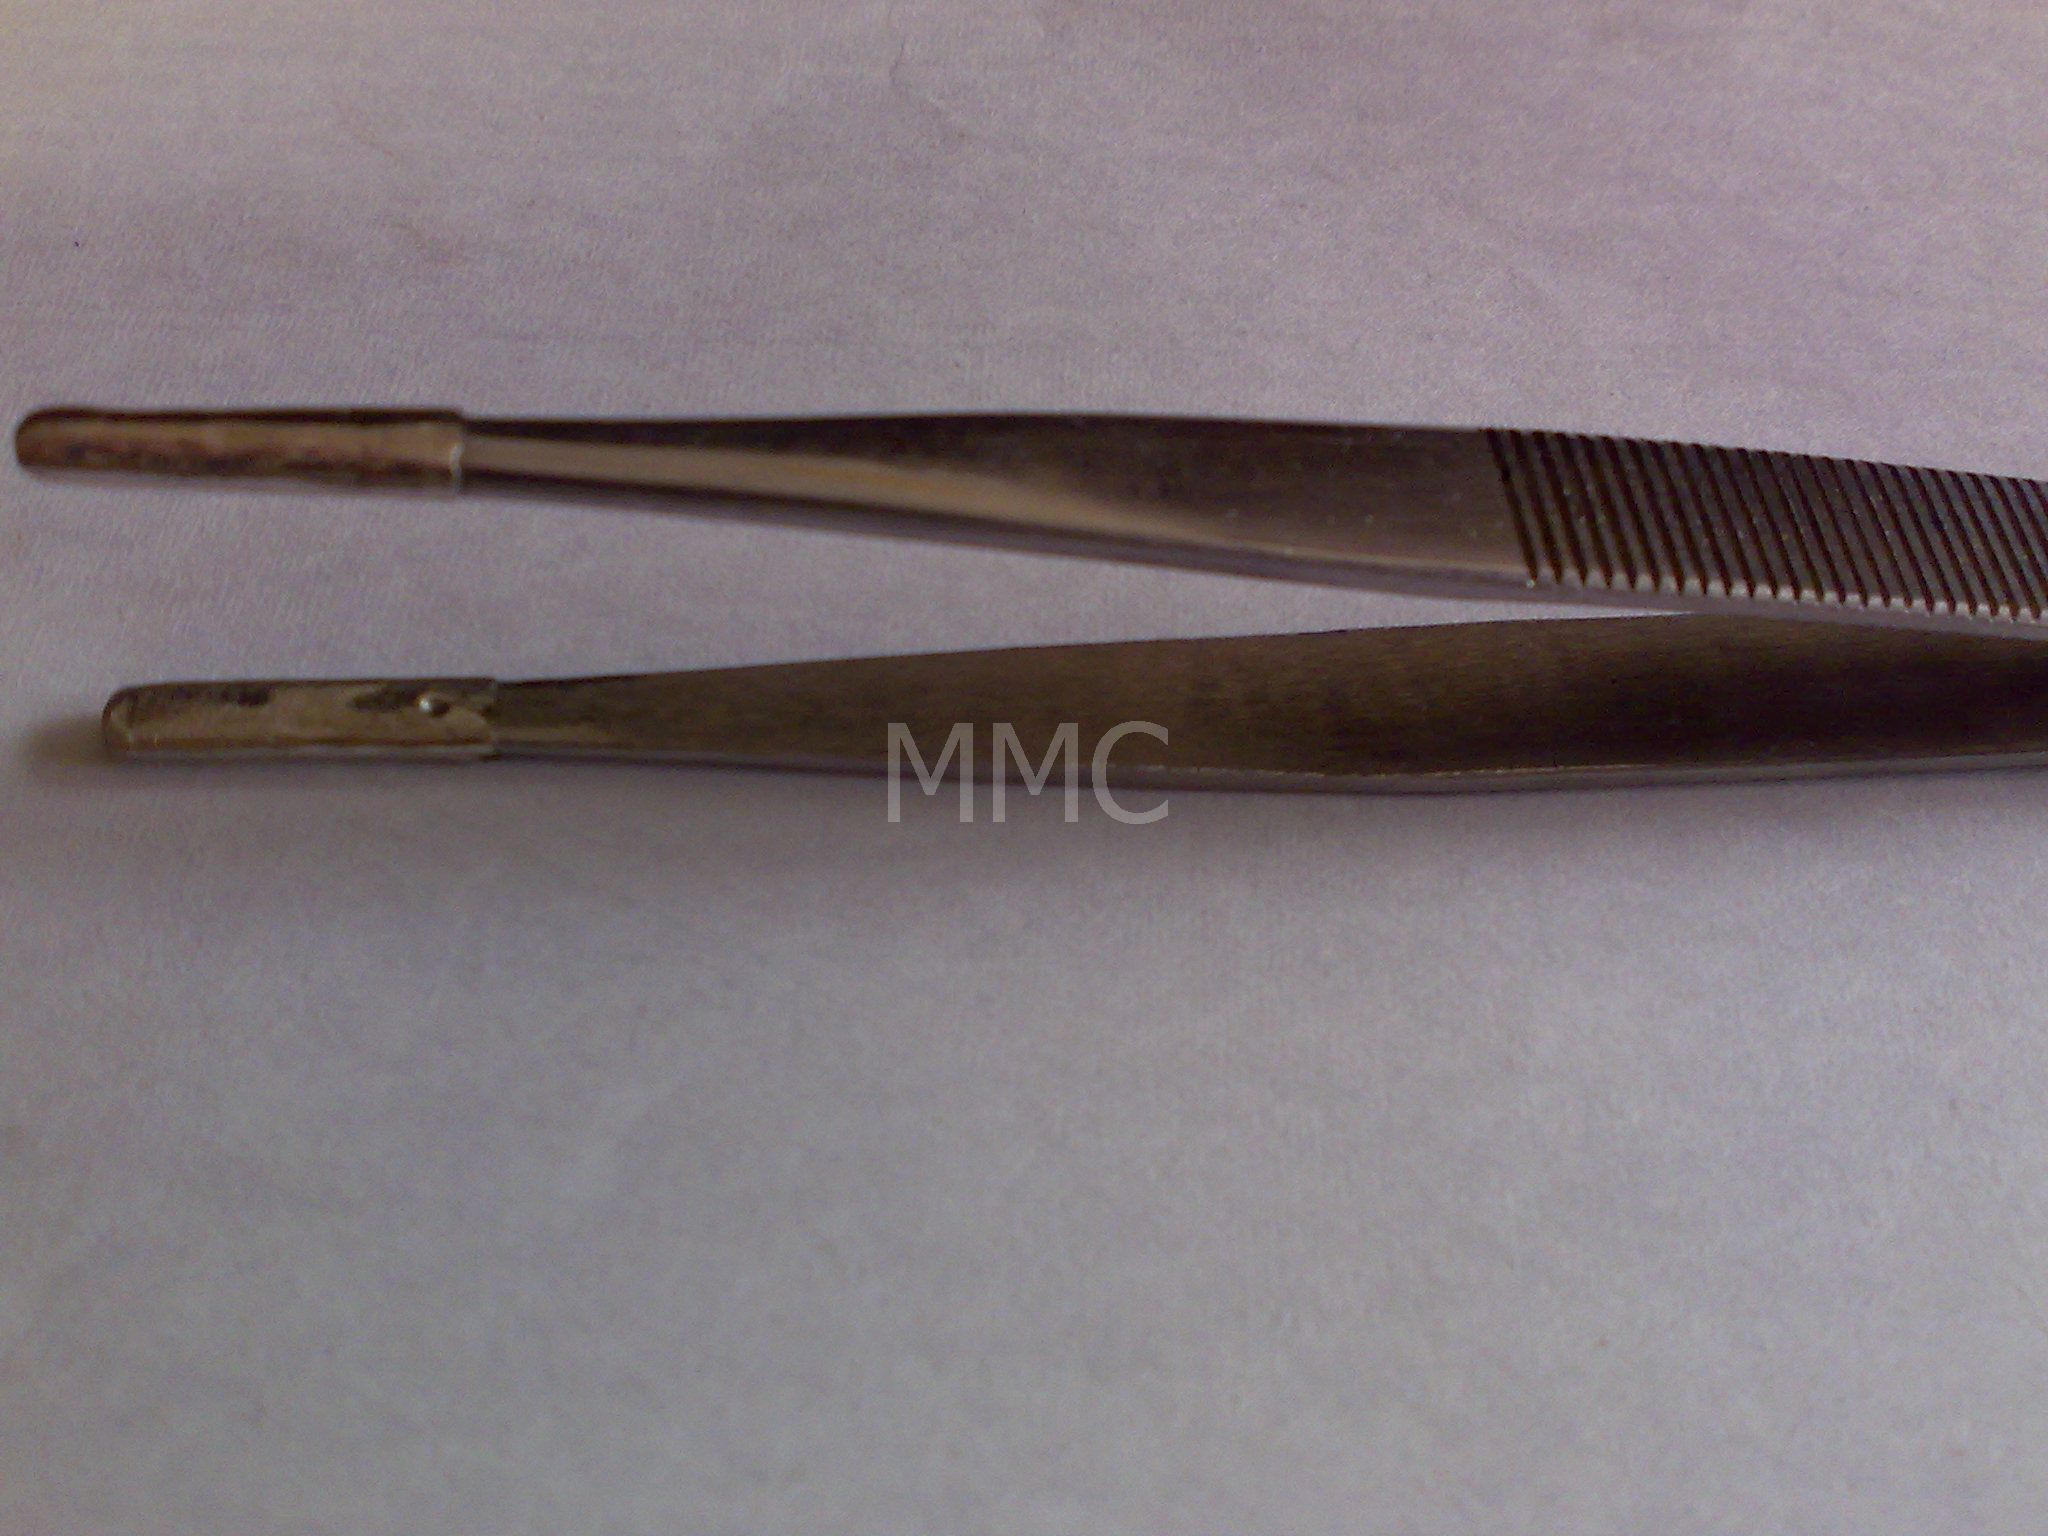 Platinum Tipped Forceps